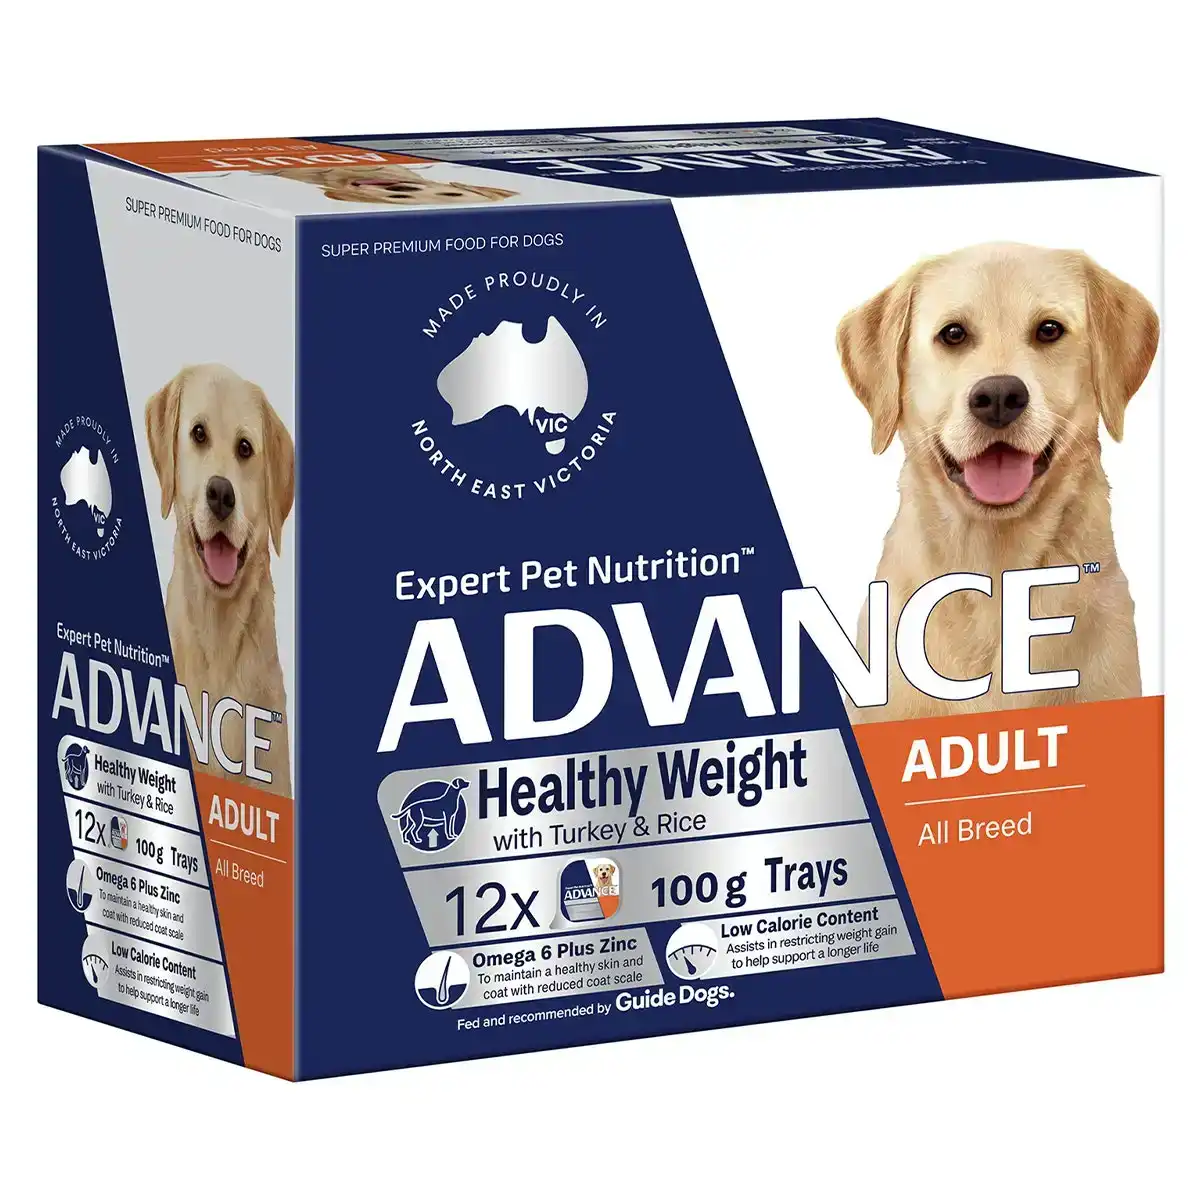 ADVANCE Healthy Weight Adult All Breed Turkey with Rice Trays Wet Dog Food (100G*12) 1 Pack